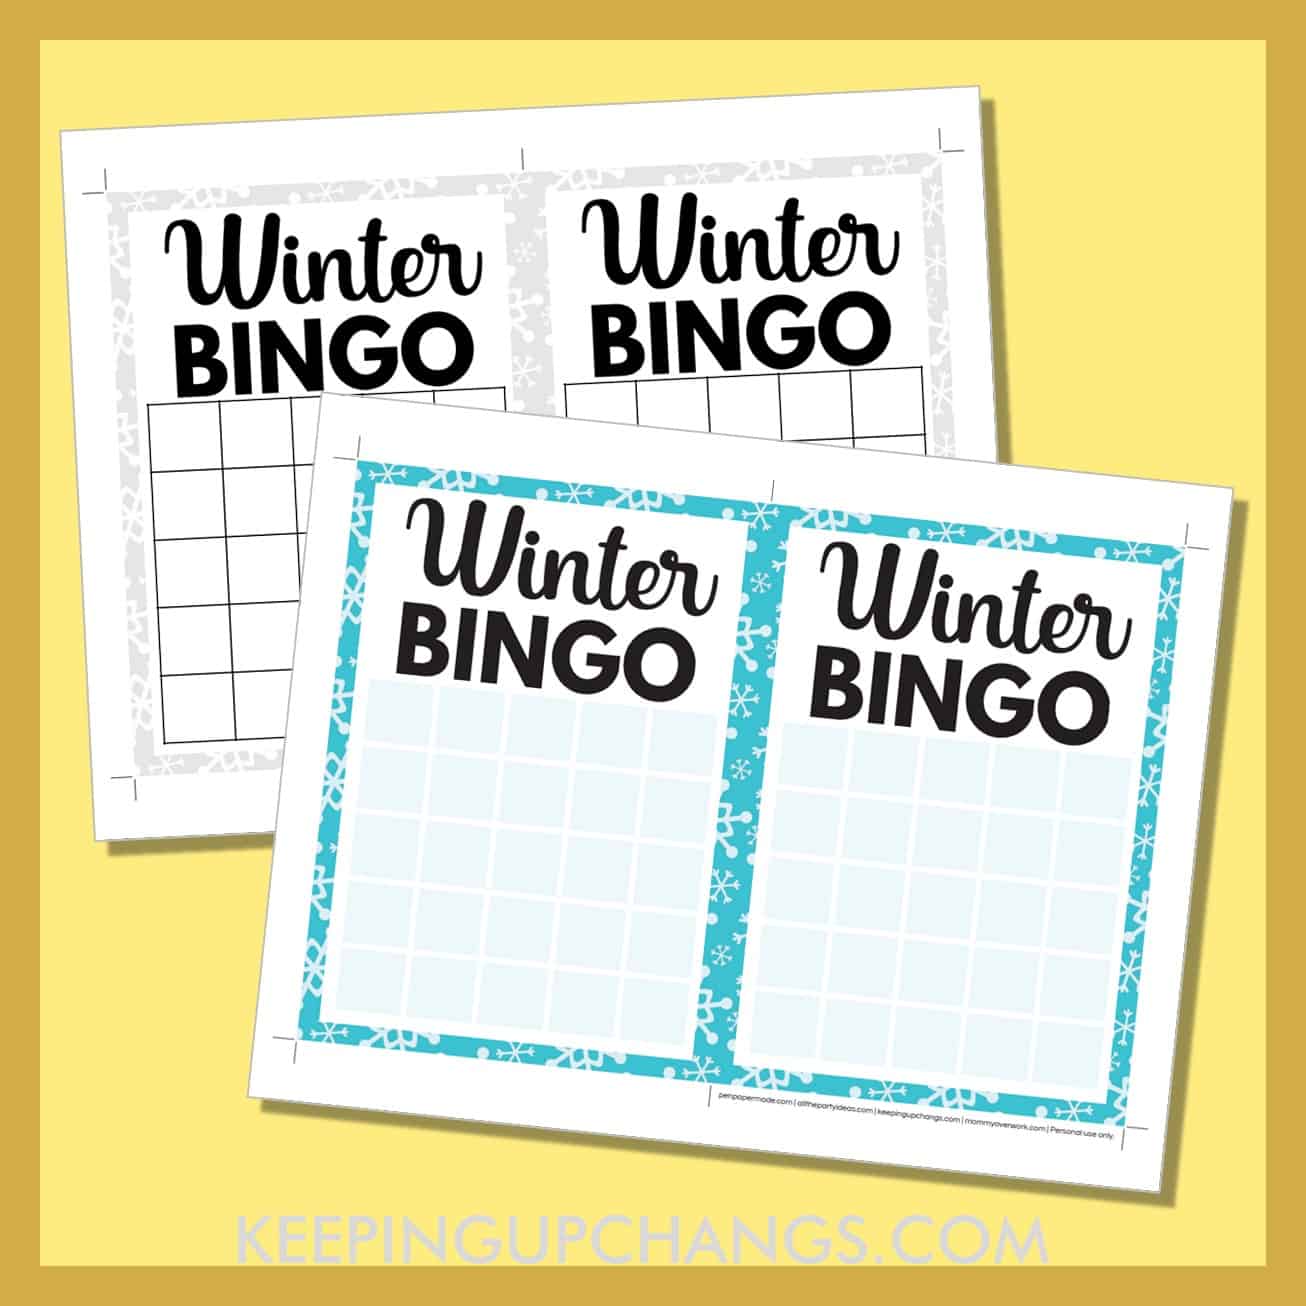 free winter bingo 5x5 grid game board blank template in color, black and white.